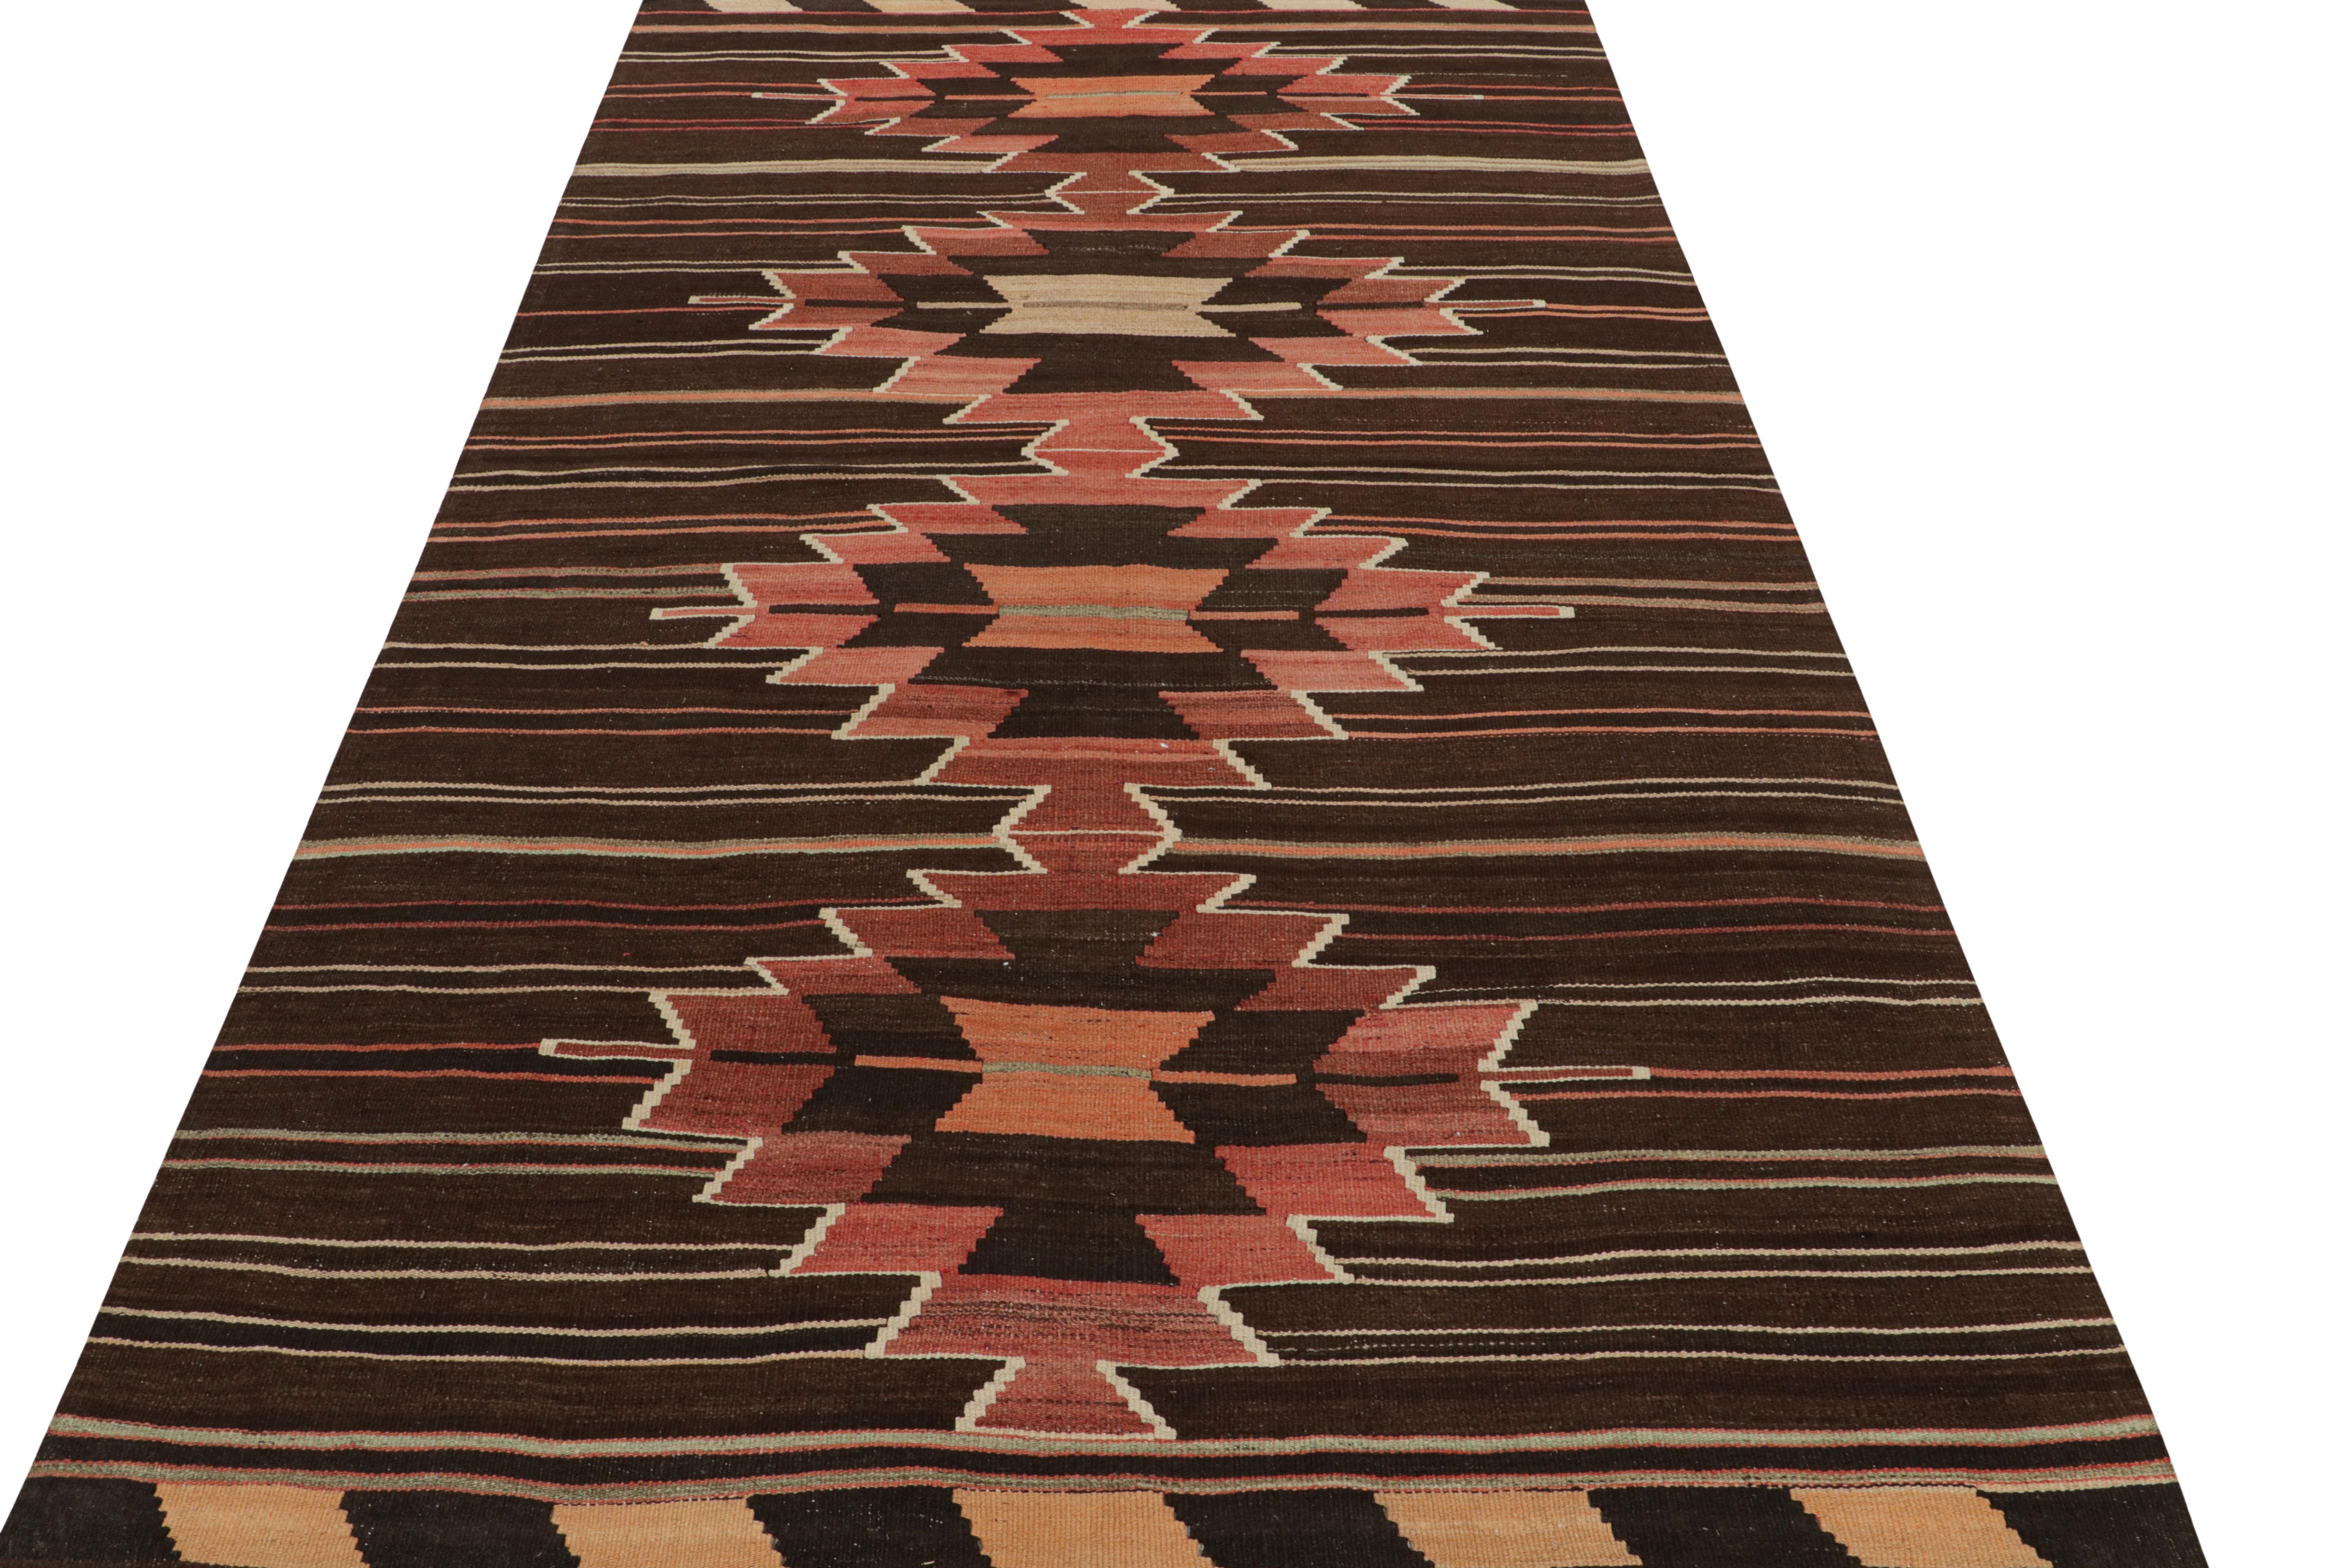 Vintage Midcentury Mut Beige-Brown and Red Wool Kilim Rug by Rug & Kilim In Good Condition For Sale In Long Island City, NY